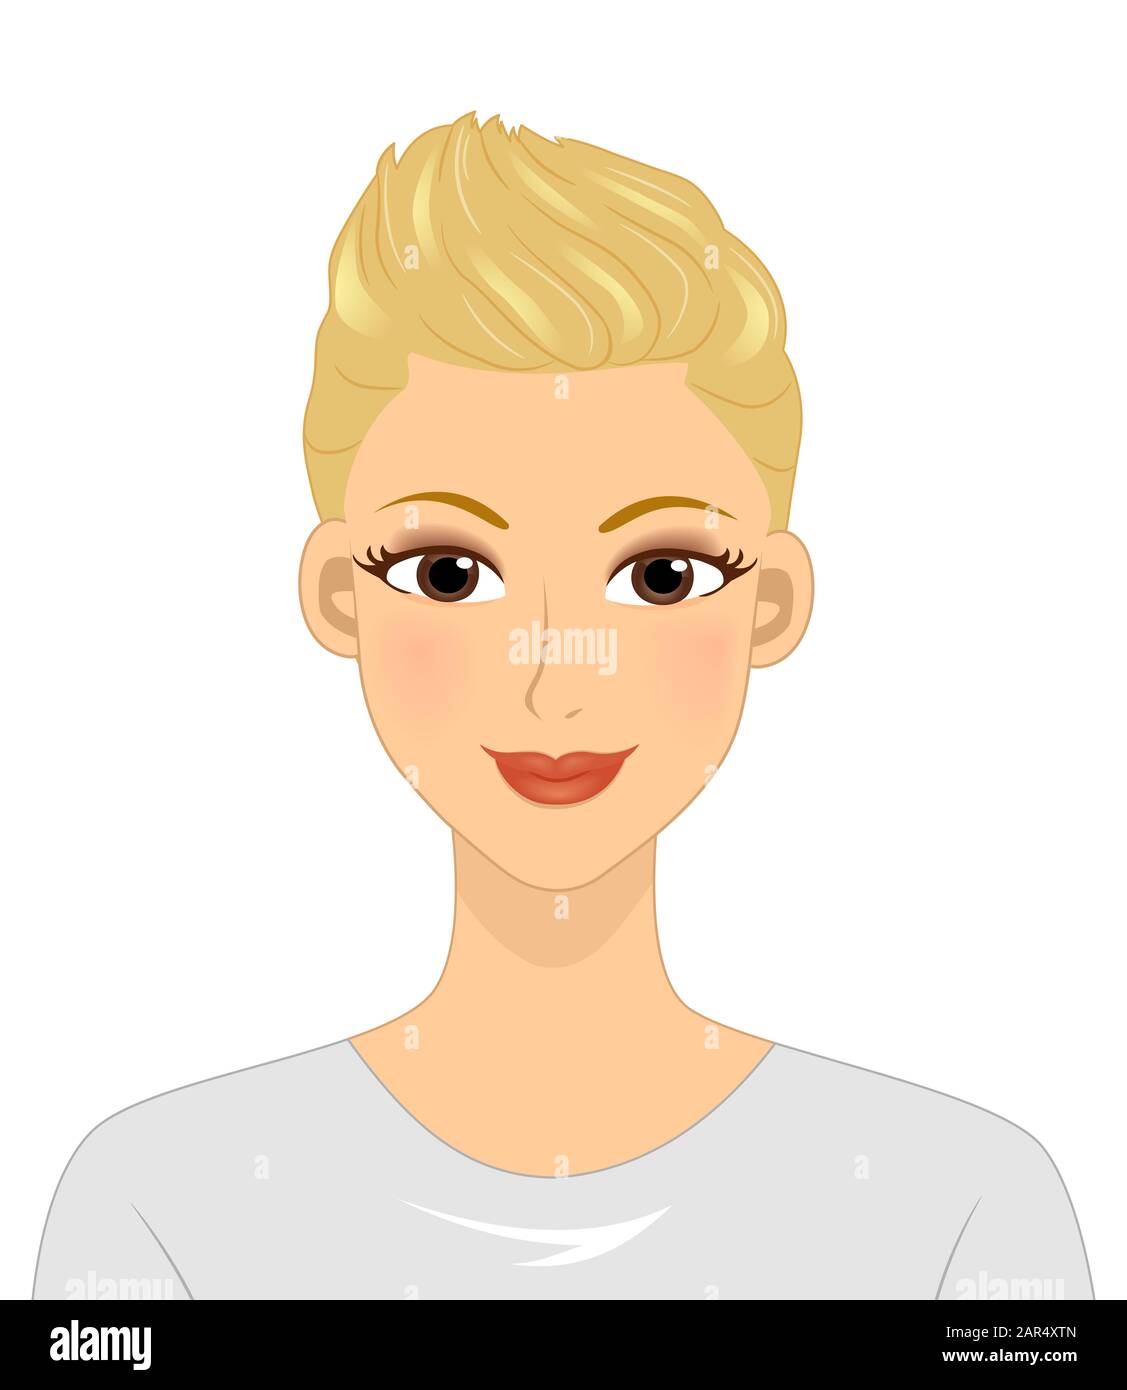 Illustration Of A Girl Smiling With A Short Brushed Up Undercut